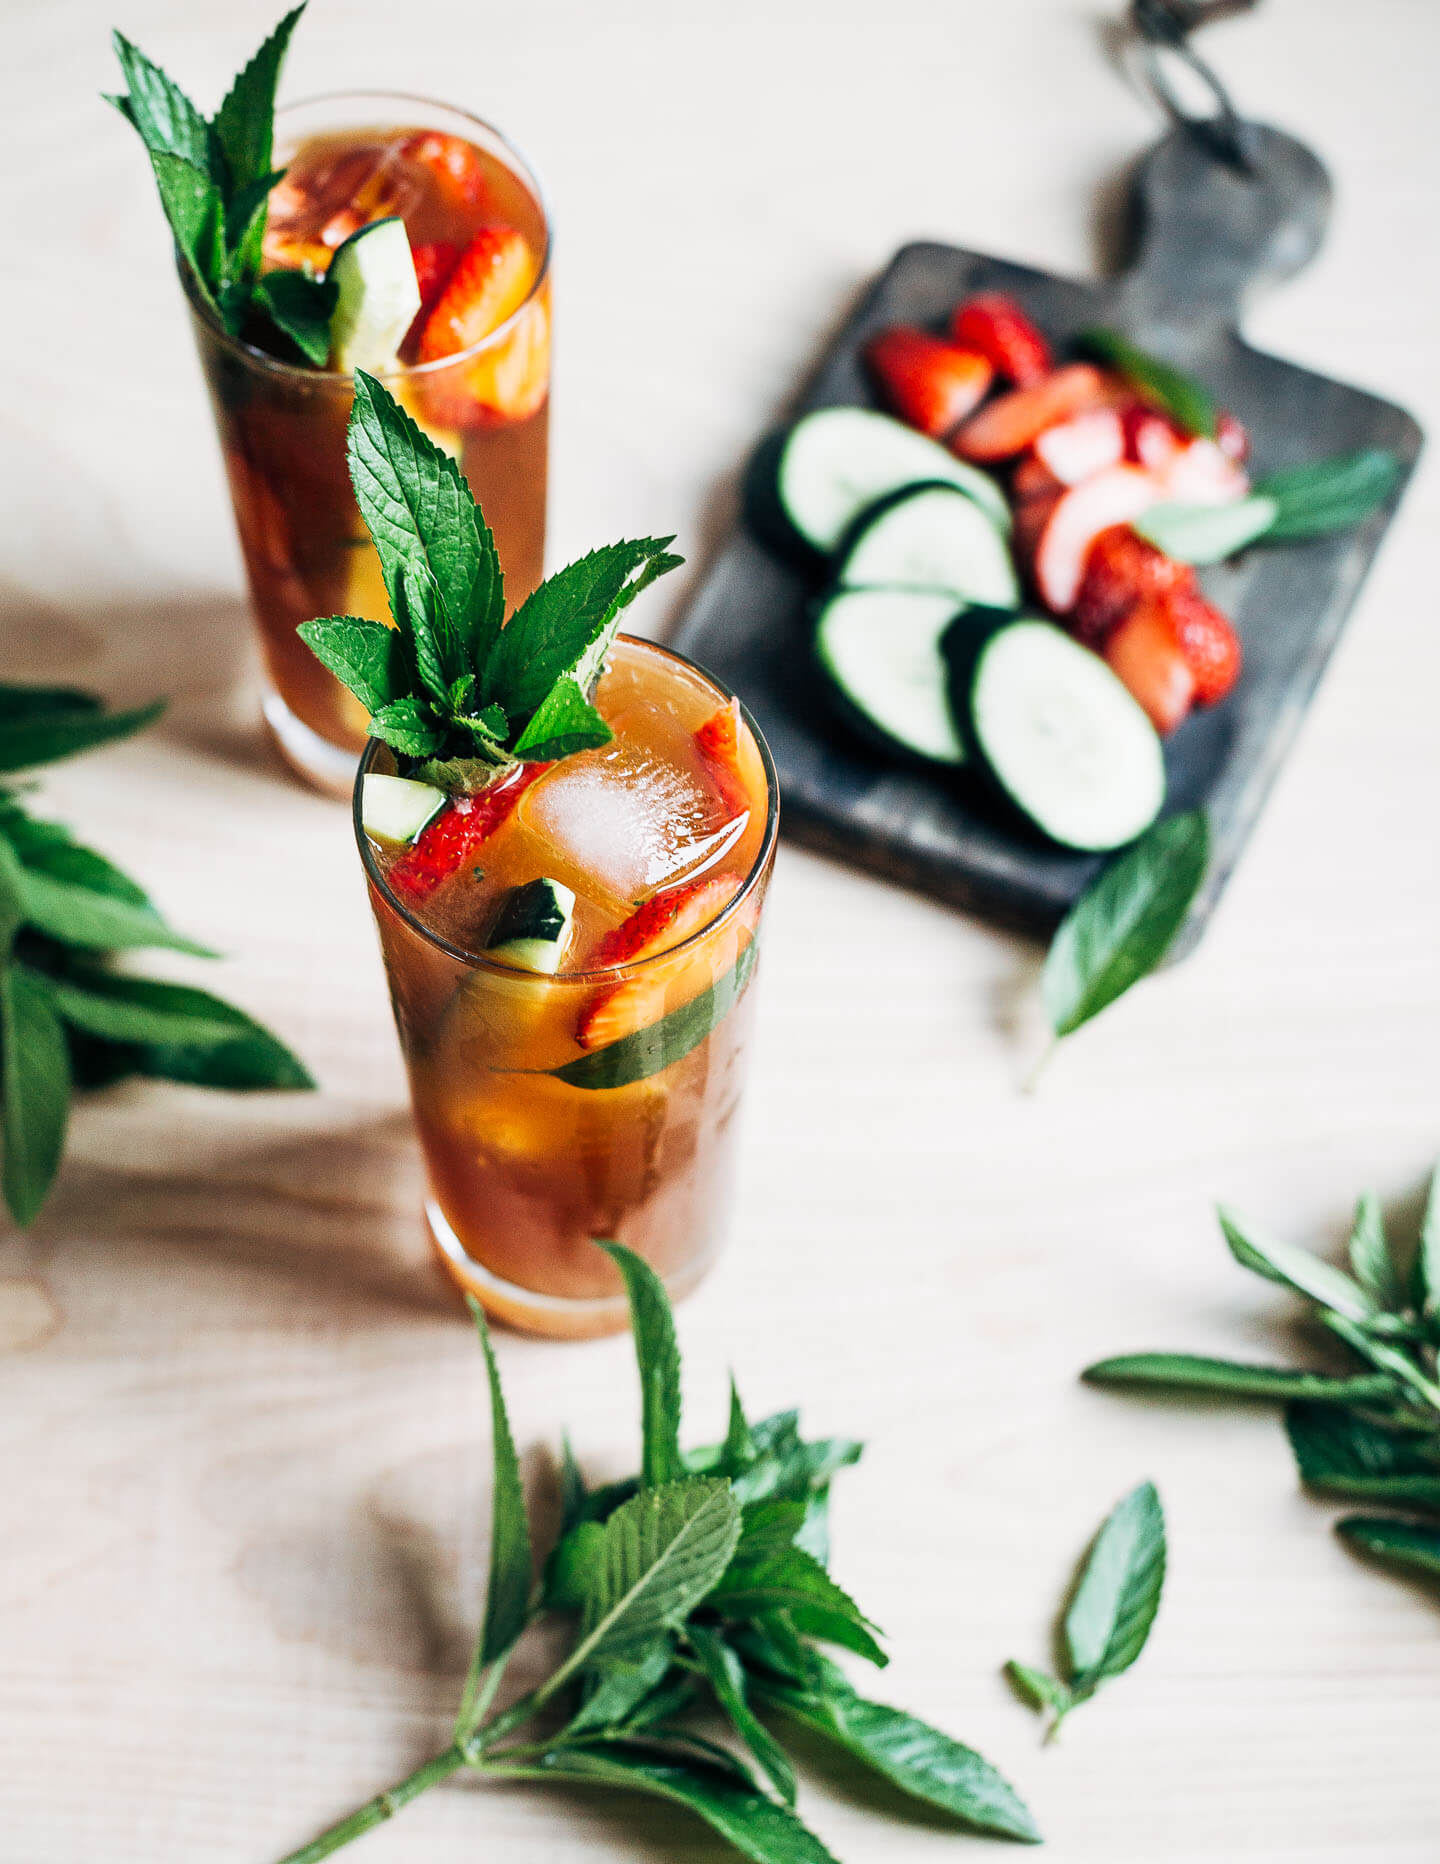 Classic Pimm’s cups with strawberries and cucumbers